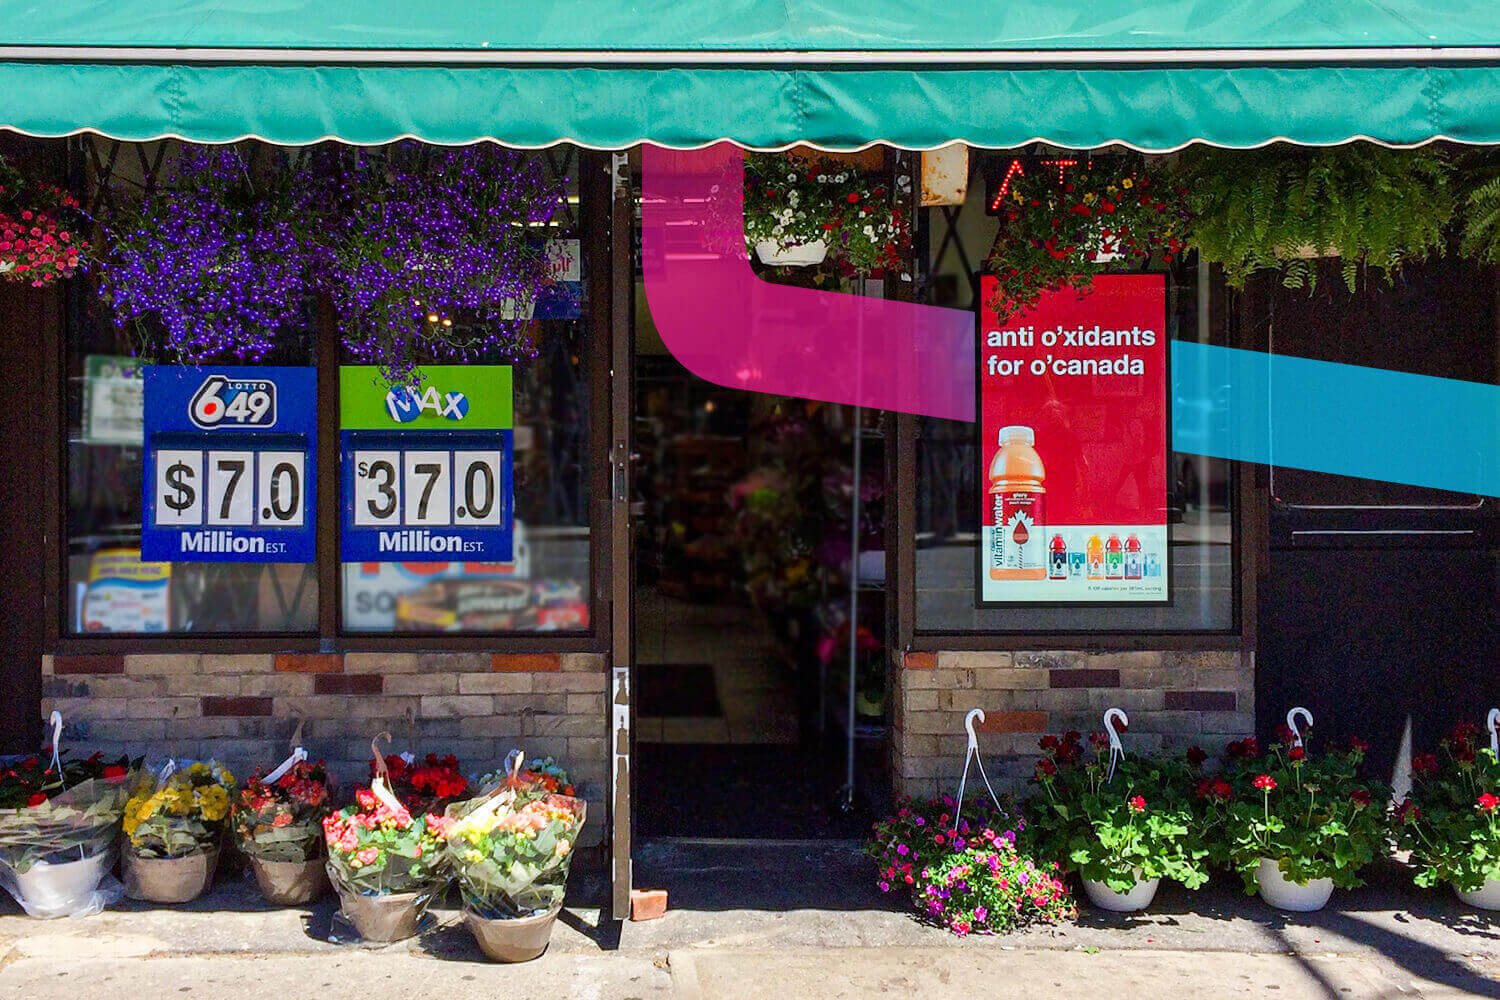 Place-based media displayed in a storefront